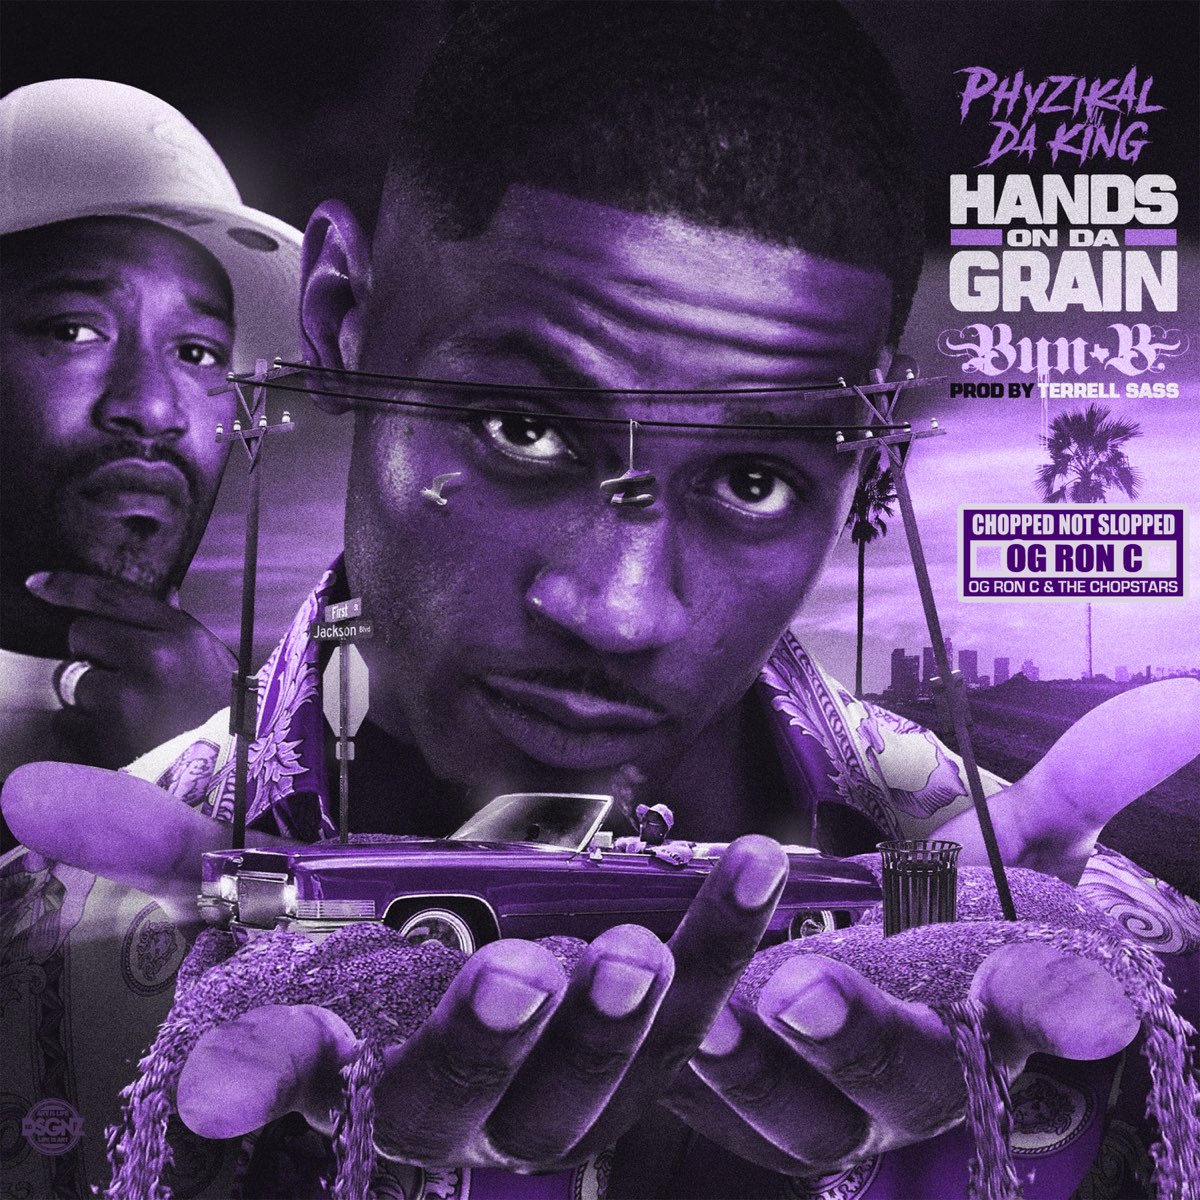 Kings hands. Chopped not Slopped. 21 Savage Chopped not Slopped обложка. Og Ron c Act a Fool.